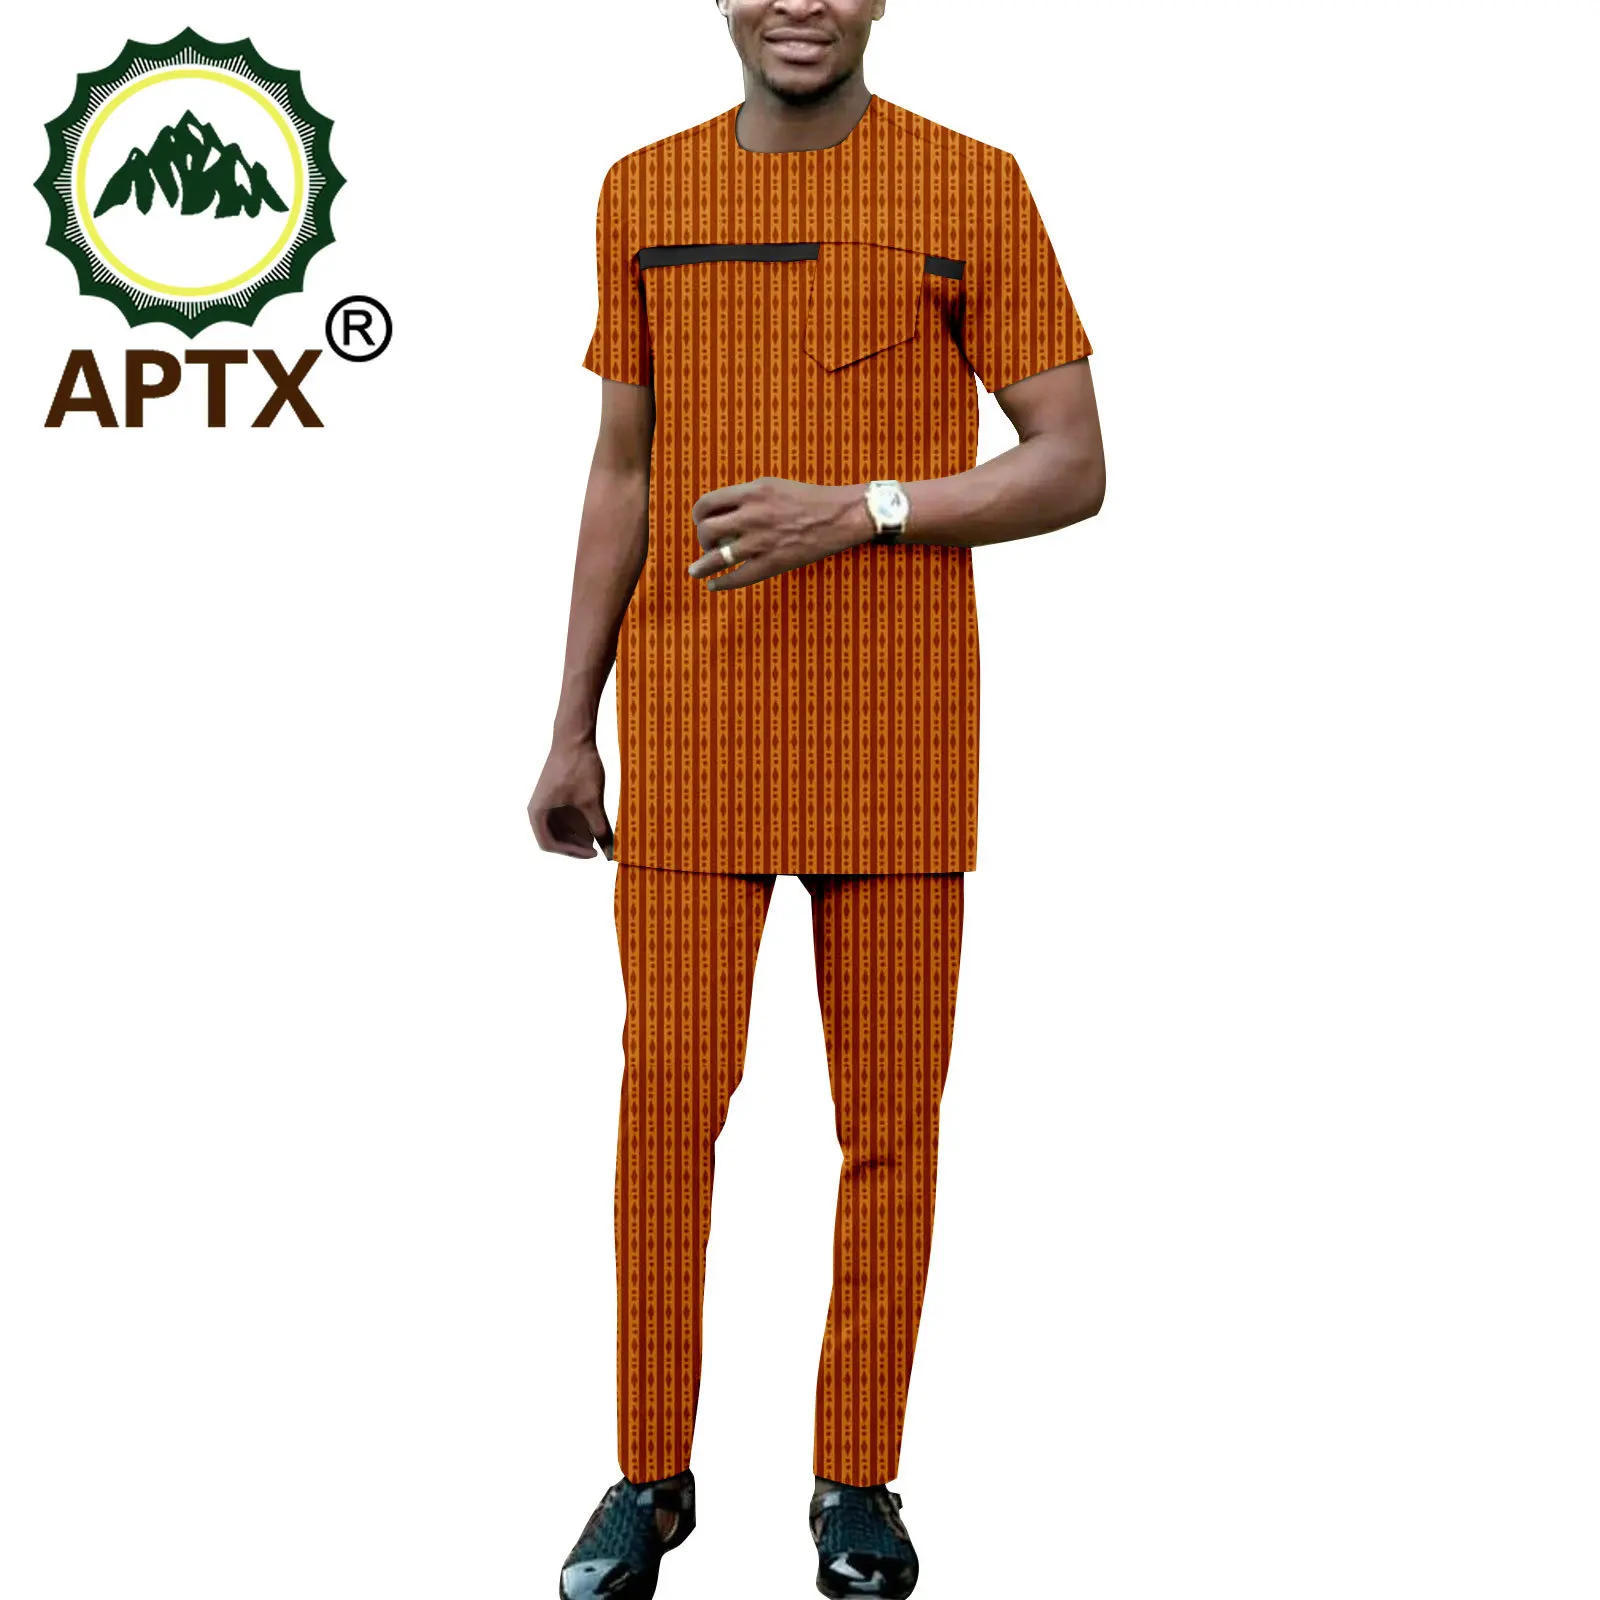 APTX African Men's Clothing Set Customized Summer Short Sleeves Top+Full Length Pants Casual Suit TA2316010